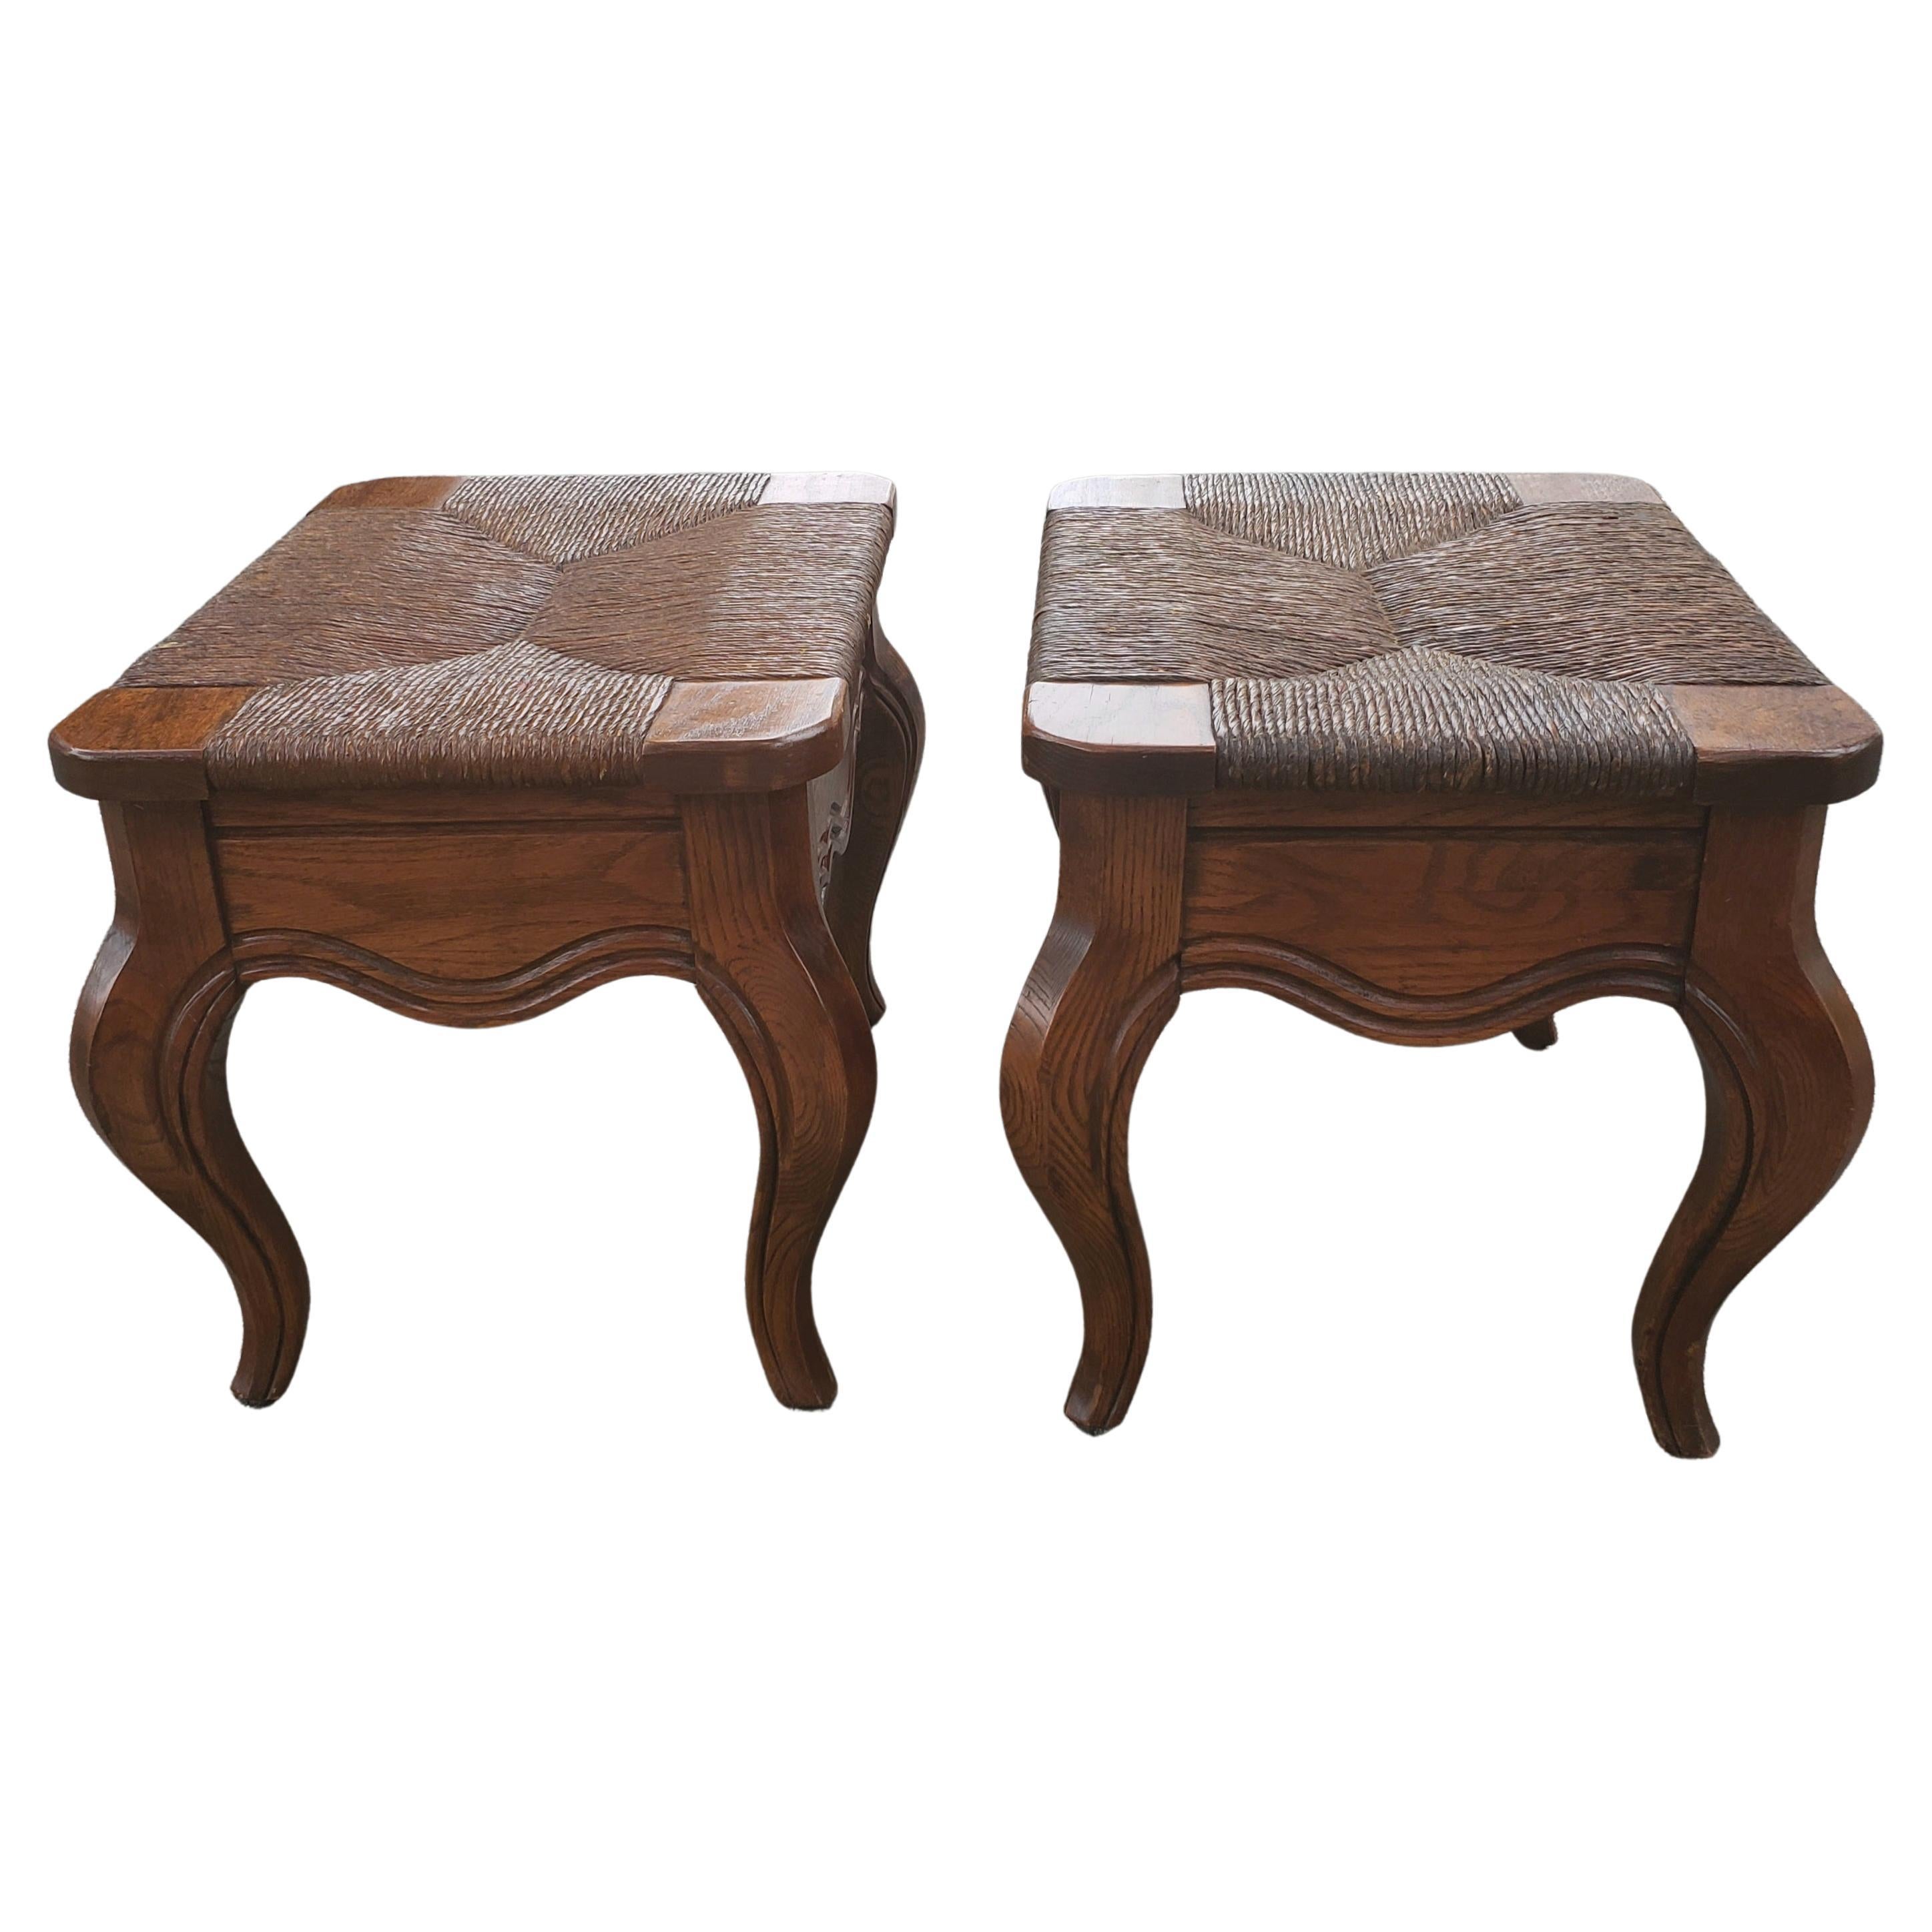 20th Century Hammary French Country Oak Rush Seat Footstools, Ottoman, a Pair